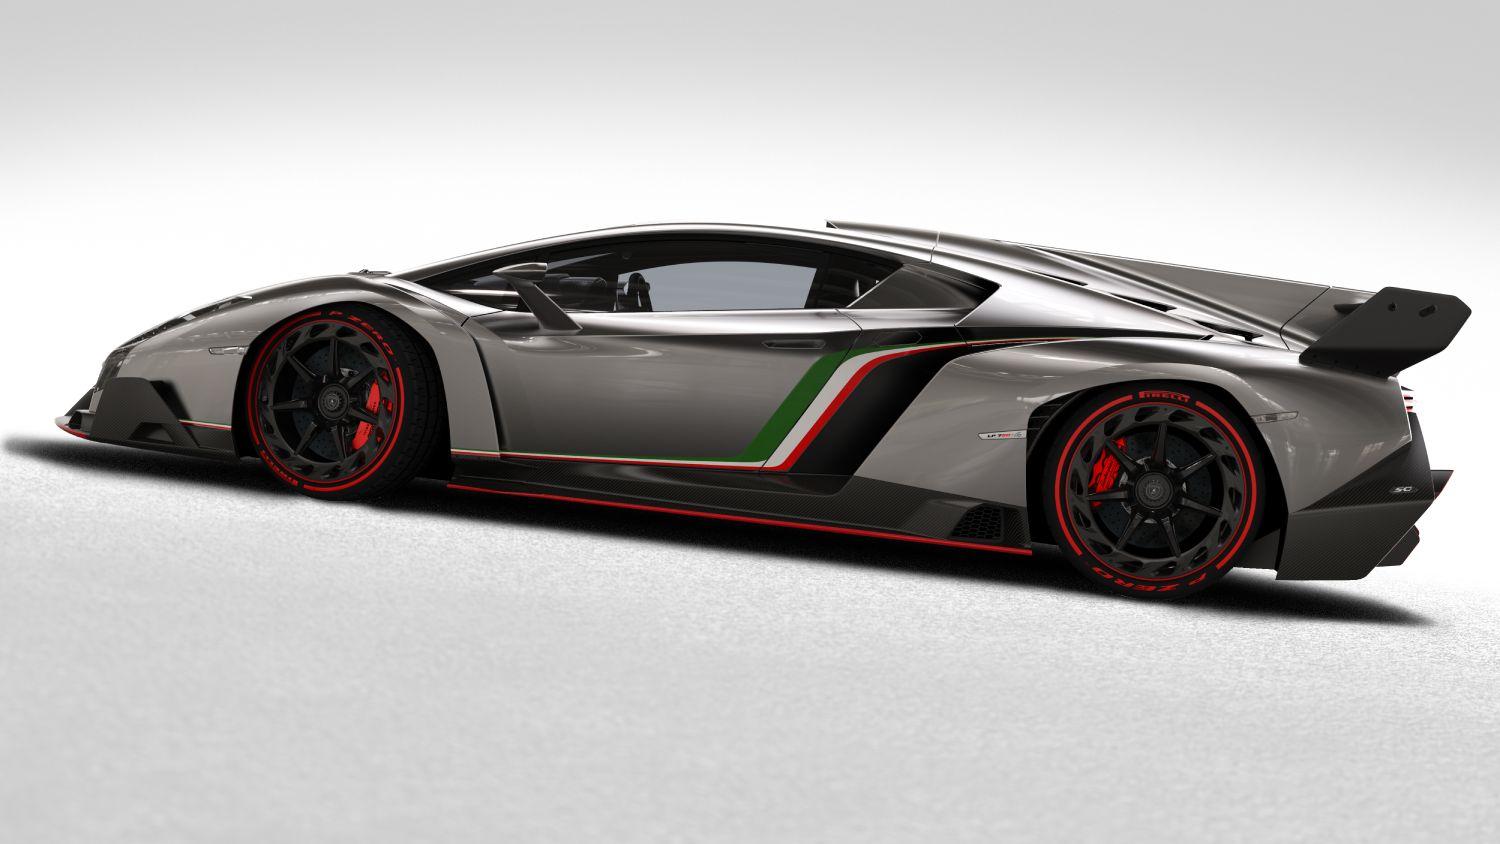 The Lamborghini Veneno, with its sharp edges and sleek body, is every bit a car made for the track. 